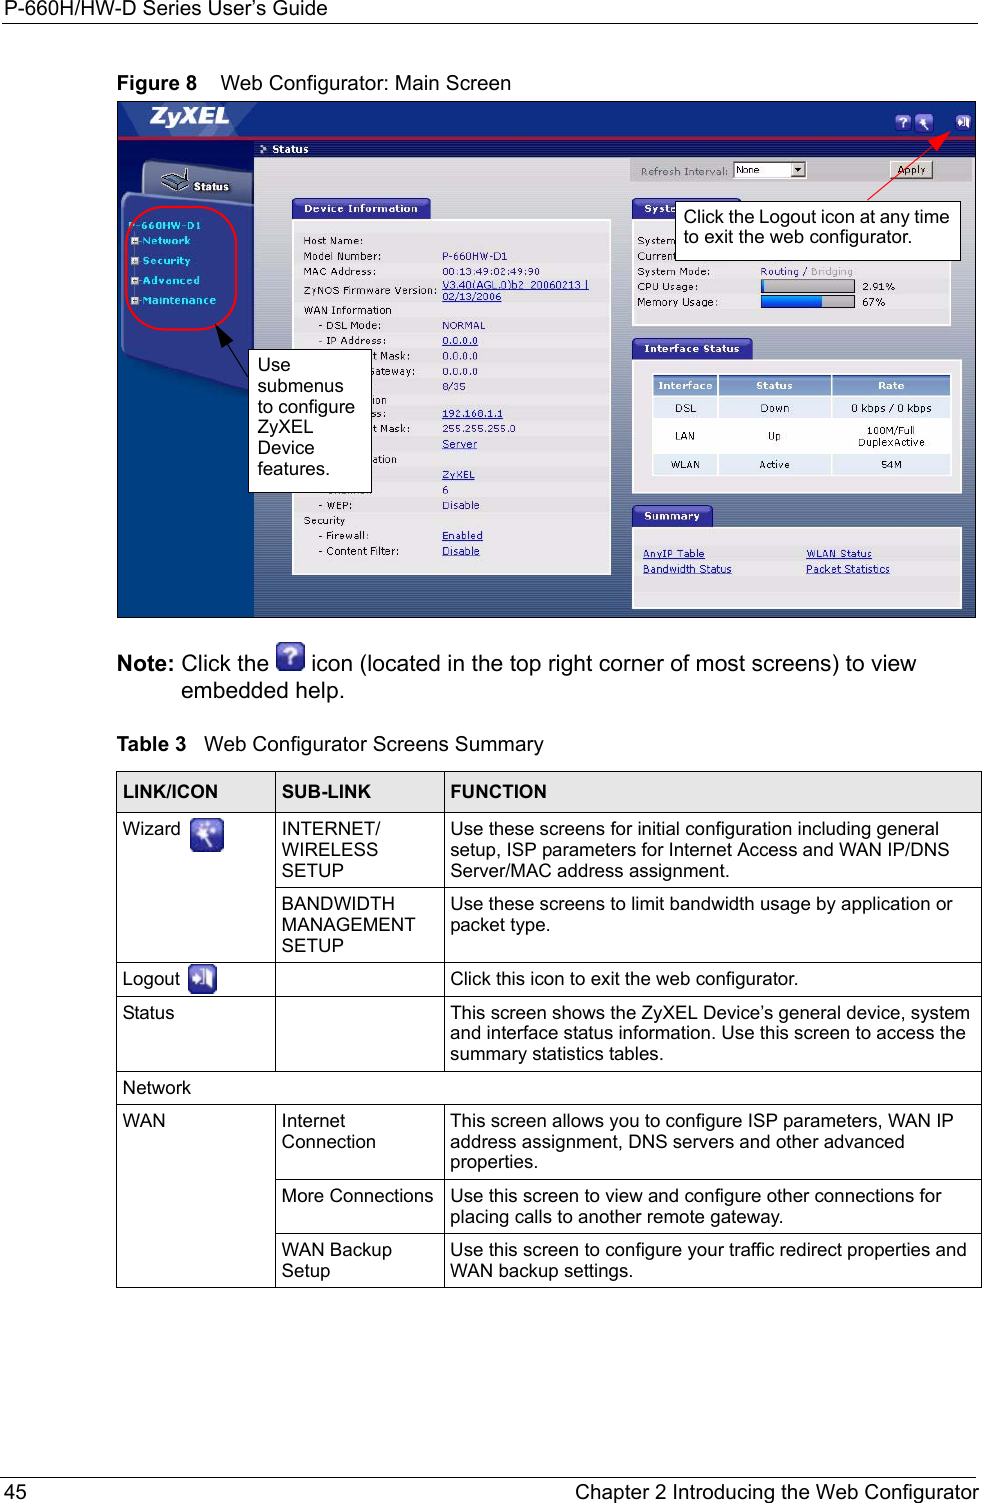 P-660H/HW-D Series User’s Guide45 Chapter 2 Introducing the Web ConfiguratorFigure 8    Web Configurator: Main Screen Note: Click the   icon (located in the top right corner of most screens) to view embedded help. Table 3   Web Configurator Screens SummaryLINK/ICON SUB-LINK FUNCTIONWizard INTERNET/WIRELESS SETUPUse these screens for initial configuration including general setup, ISP parameters for Internet Access and WAN IP/DNS Server/MAC address assignment.BANDWIDTH MANAGEMENT SETUPUse these screens to limit bandwidth usage by application or packet type. Logout  Click this icon to exit the web configurator.Status This screen shows the ZyXEL Device’s general device, system and interface status information. Use this screen to access the summary statistics tables.NetworkWAN Internet ConnectionThis screen allows you to configure ISP parameters, WAN IP address assignment, DNS servers and other advanced properties.More Connections Use this screen to view and configure other connections for placing calls to another remote gateway.WAN Backup SetupUse this screen to configure your traffic redirect properties and WAN backup settings.Use submenus to configure ZyXEL Device features.Click the Logout icon at any time to exit the web configurator.